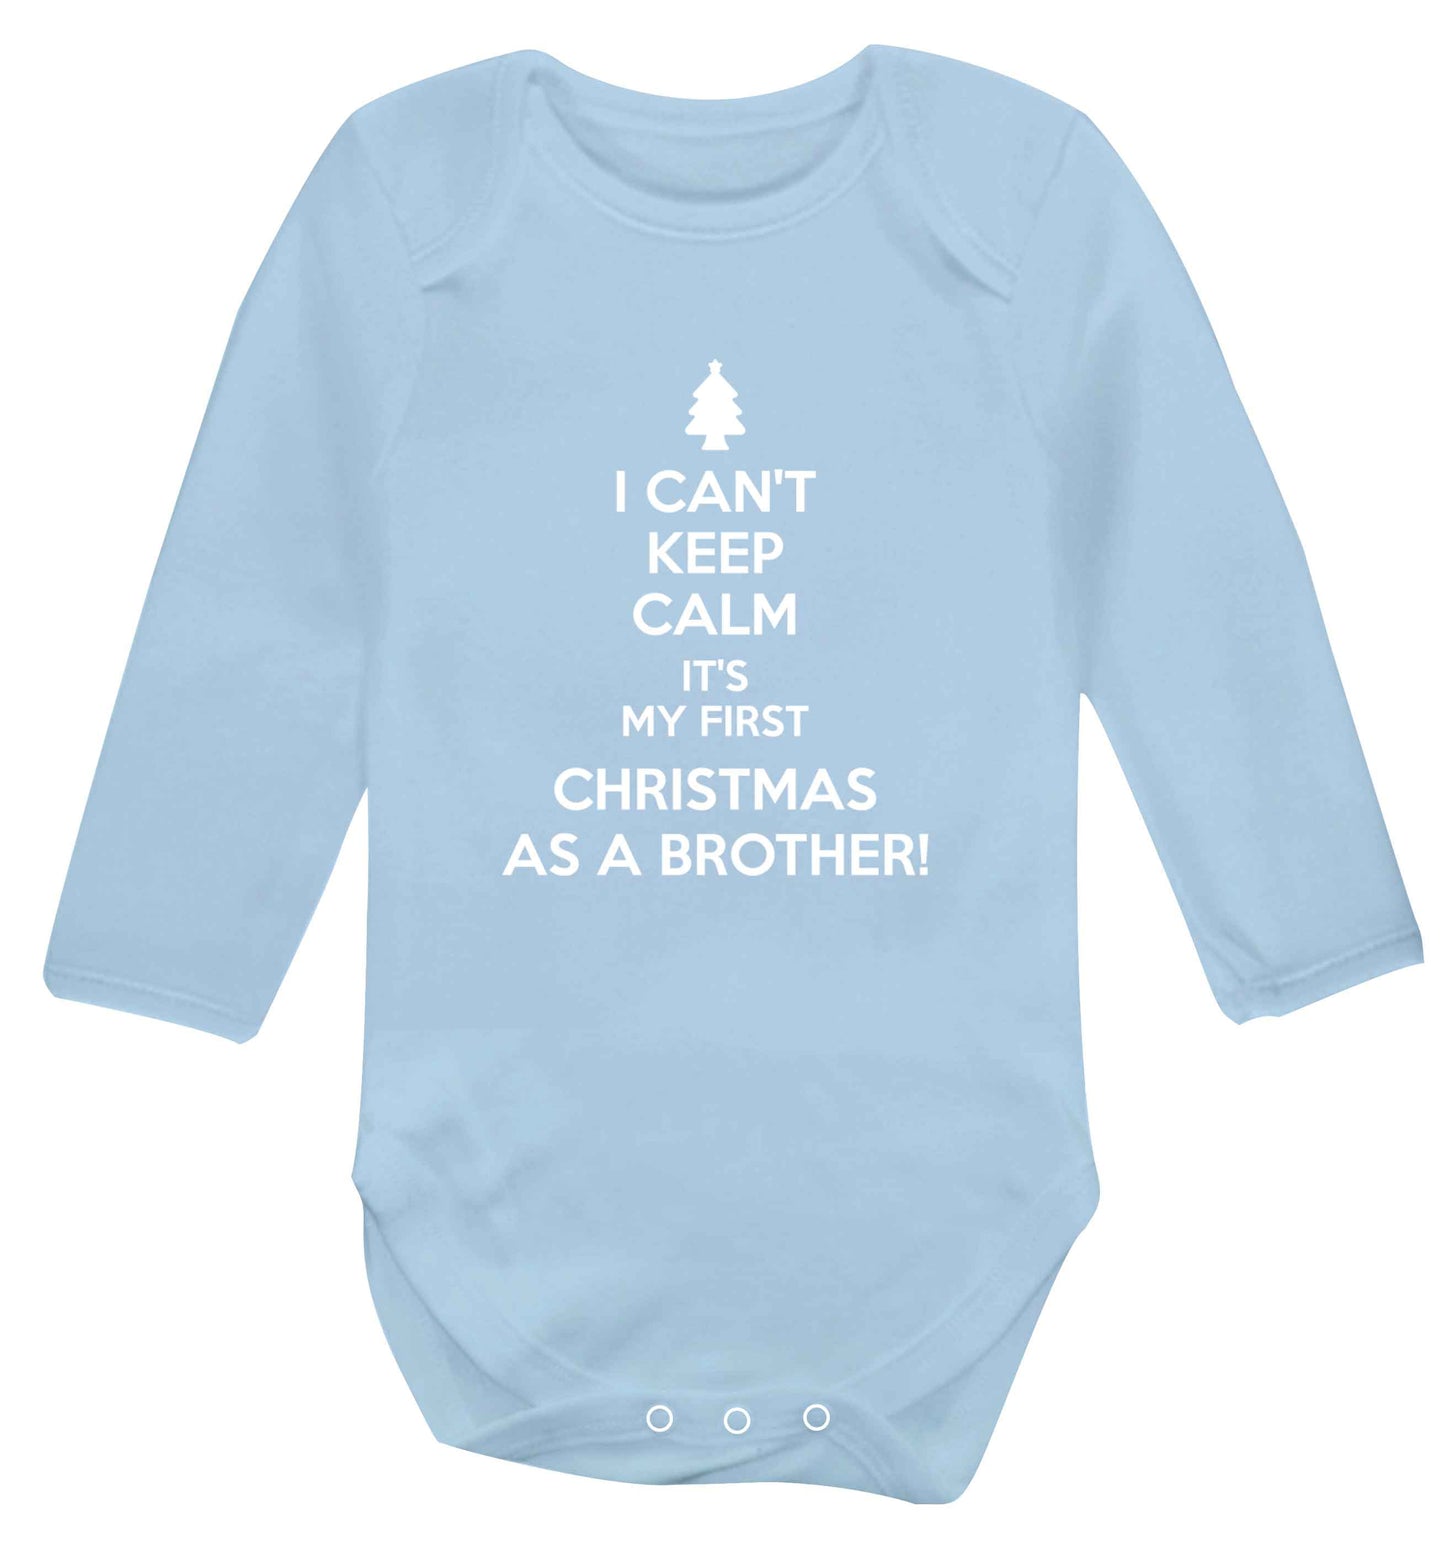 I can't keep calm it's my first Christmas as a brother! Baby Vest long sleeved pale blue 6-12 months